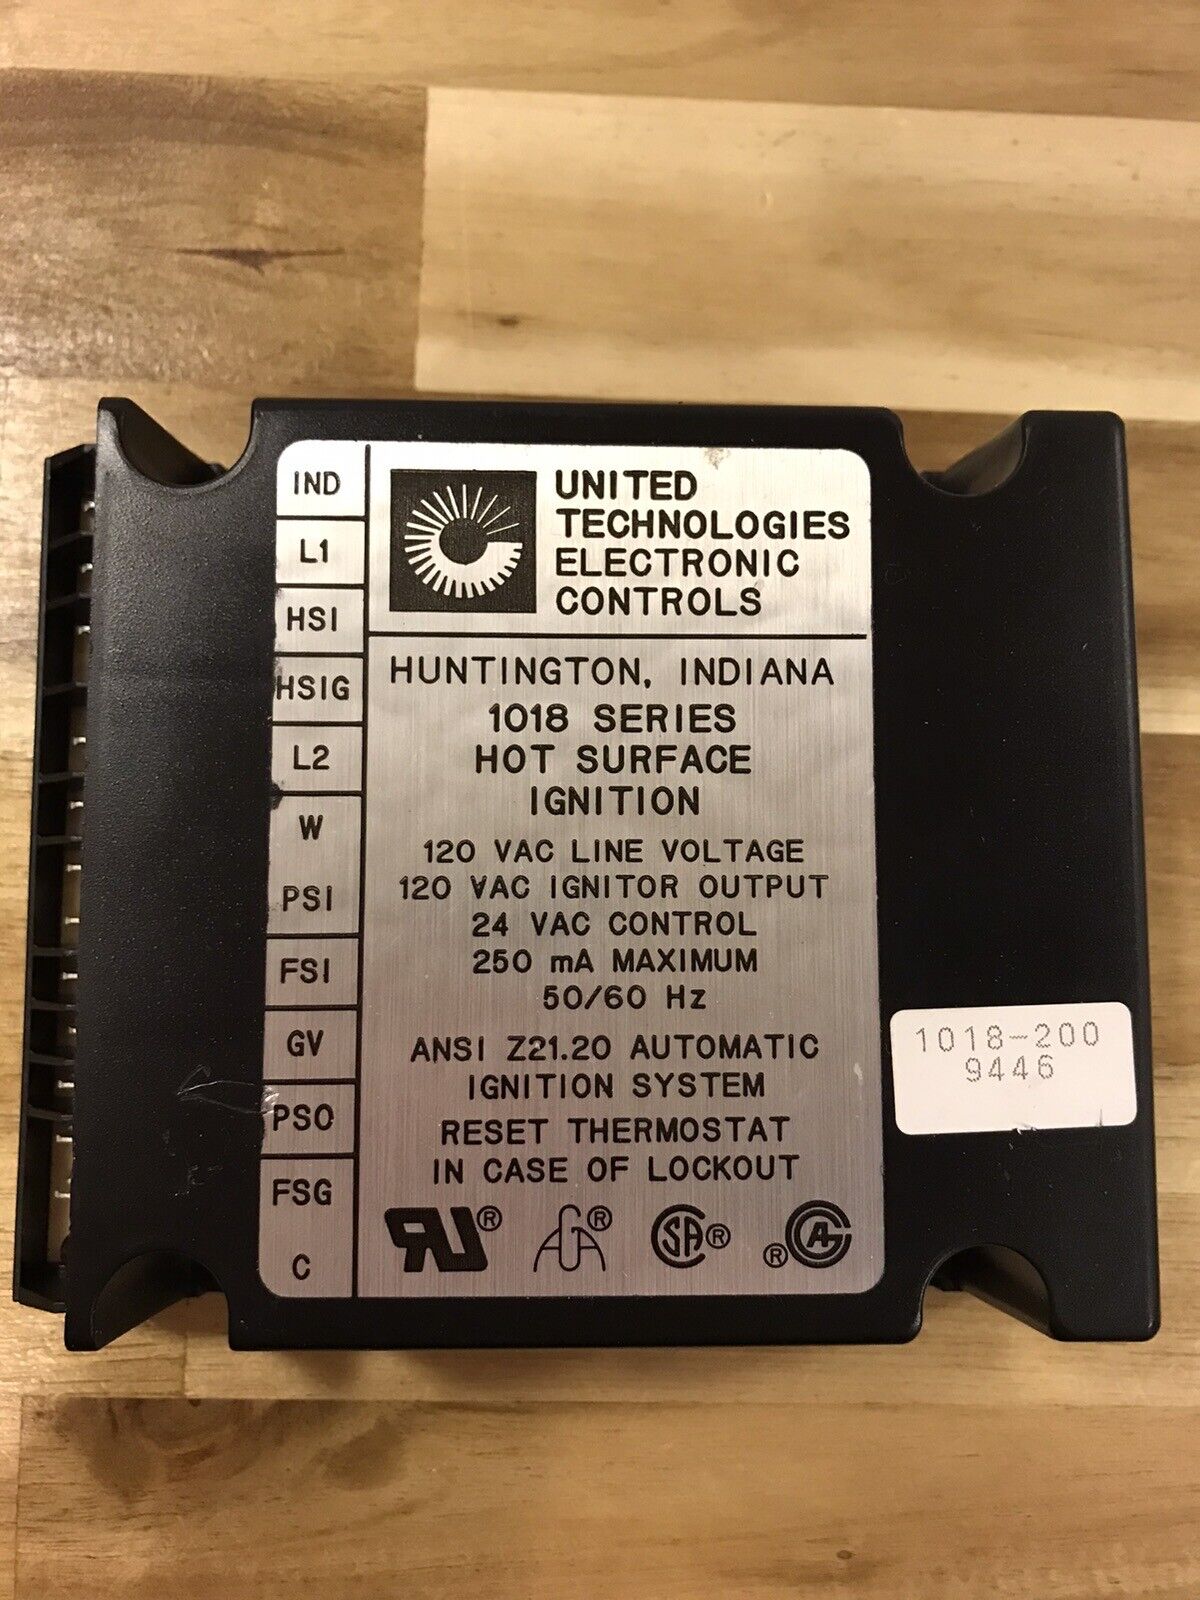 United technologies 1018 series hot surface ignition 1018-200. 9446